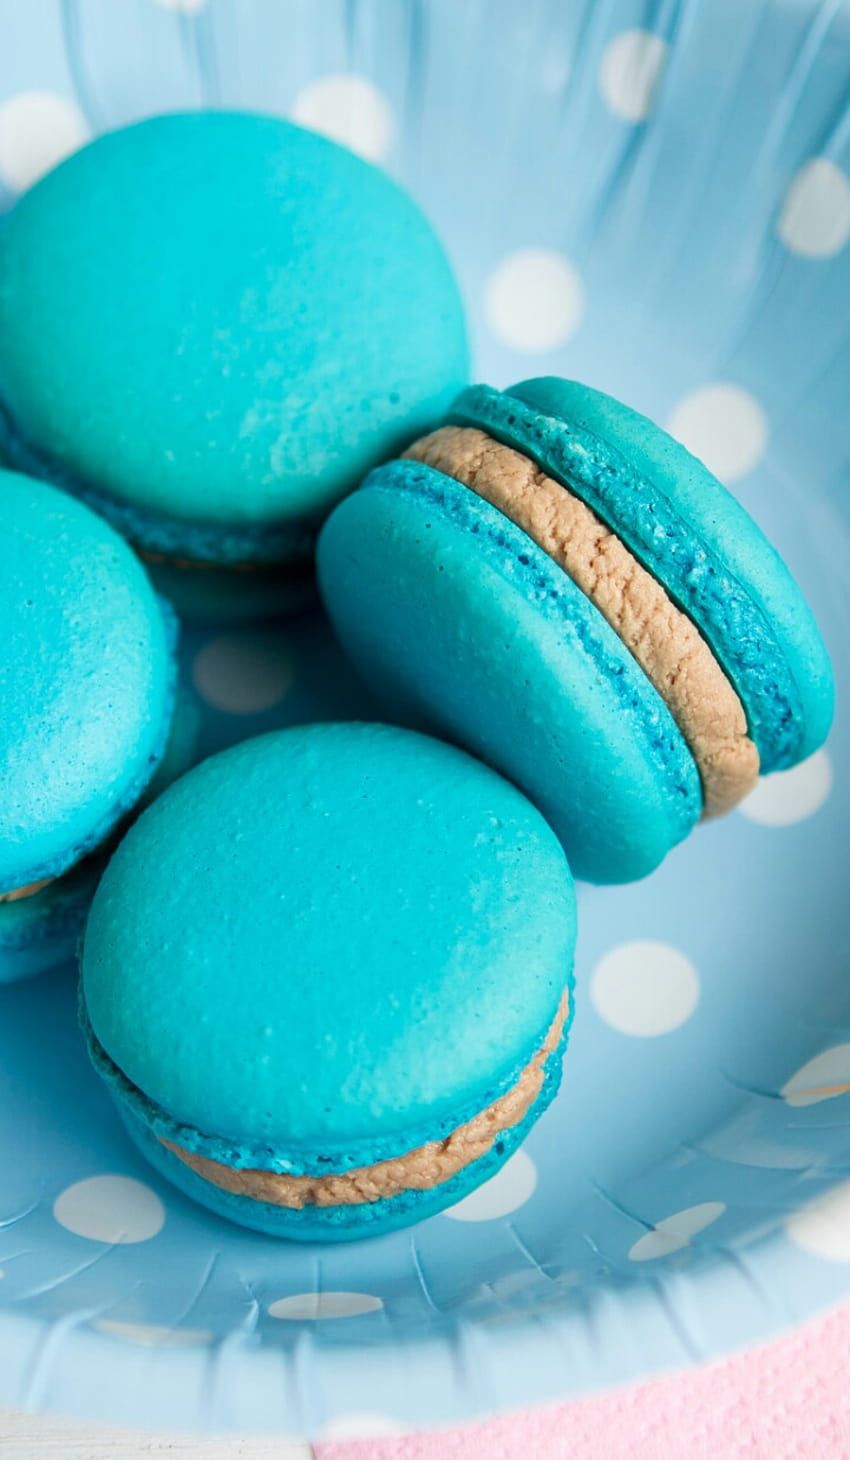 Blue macarons with a peanut butter filling in a blue bowl with white polka dots. - Teal, macarons